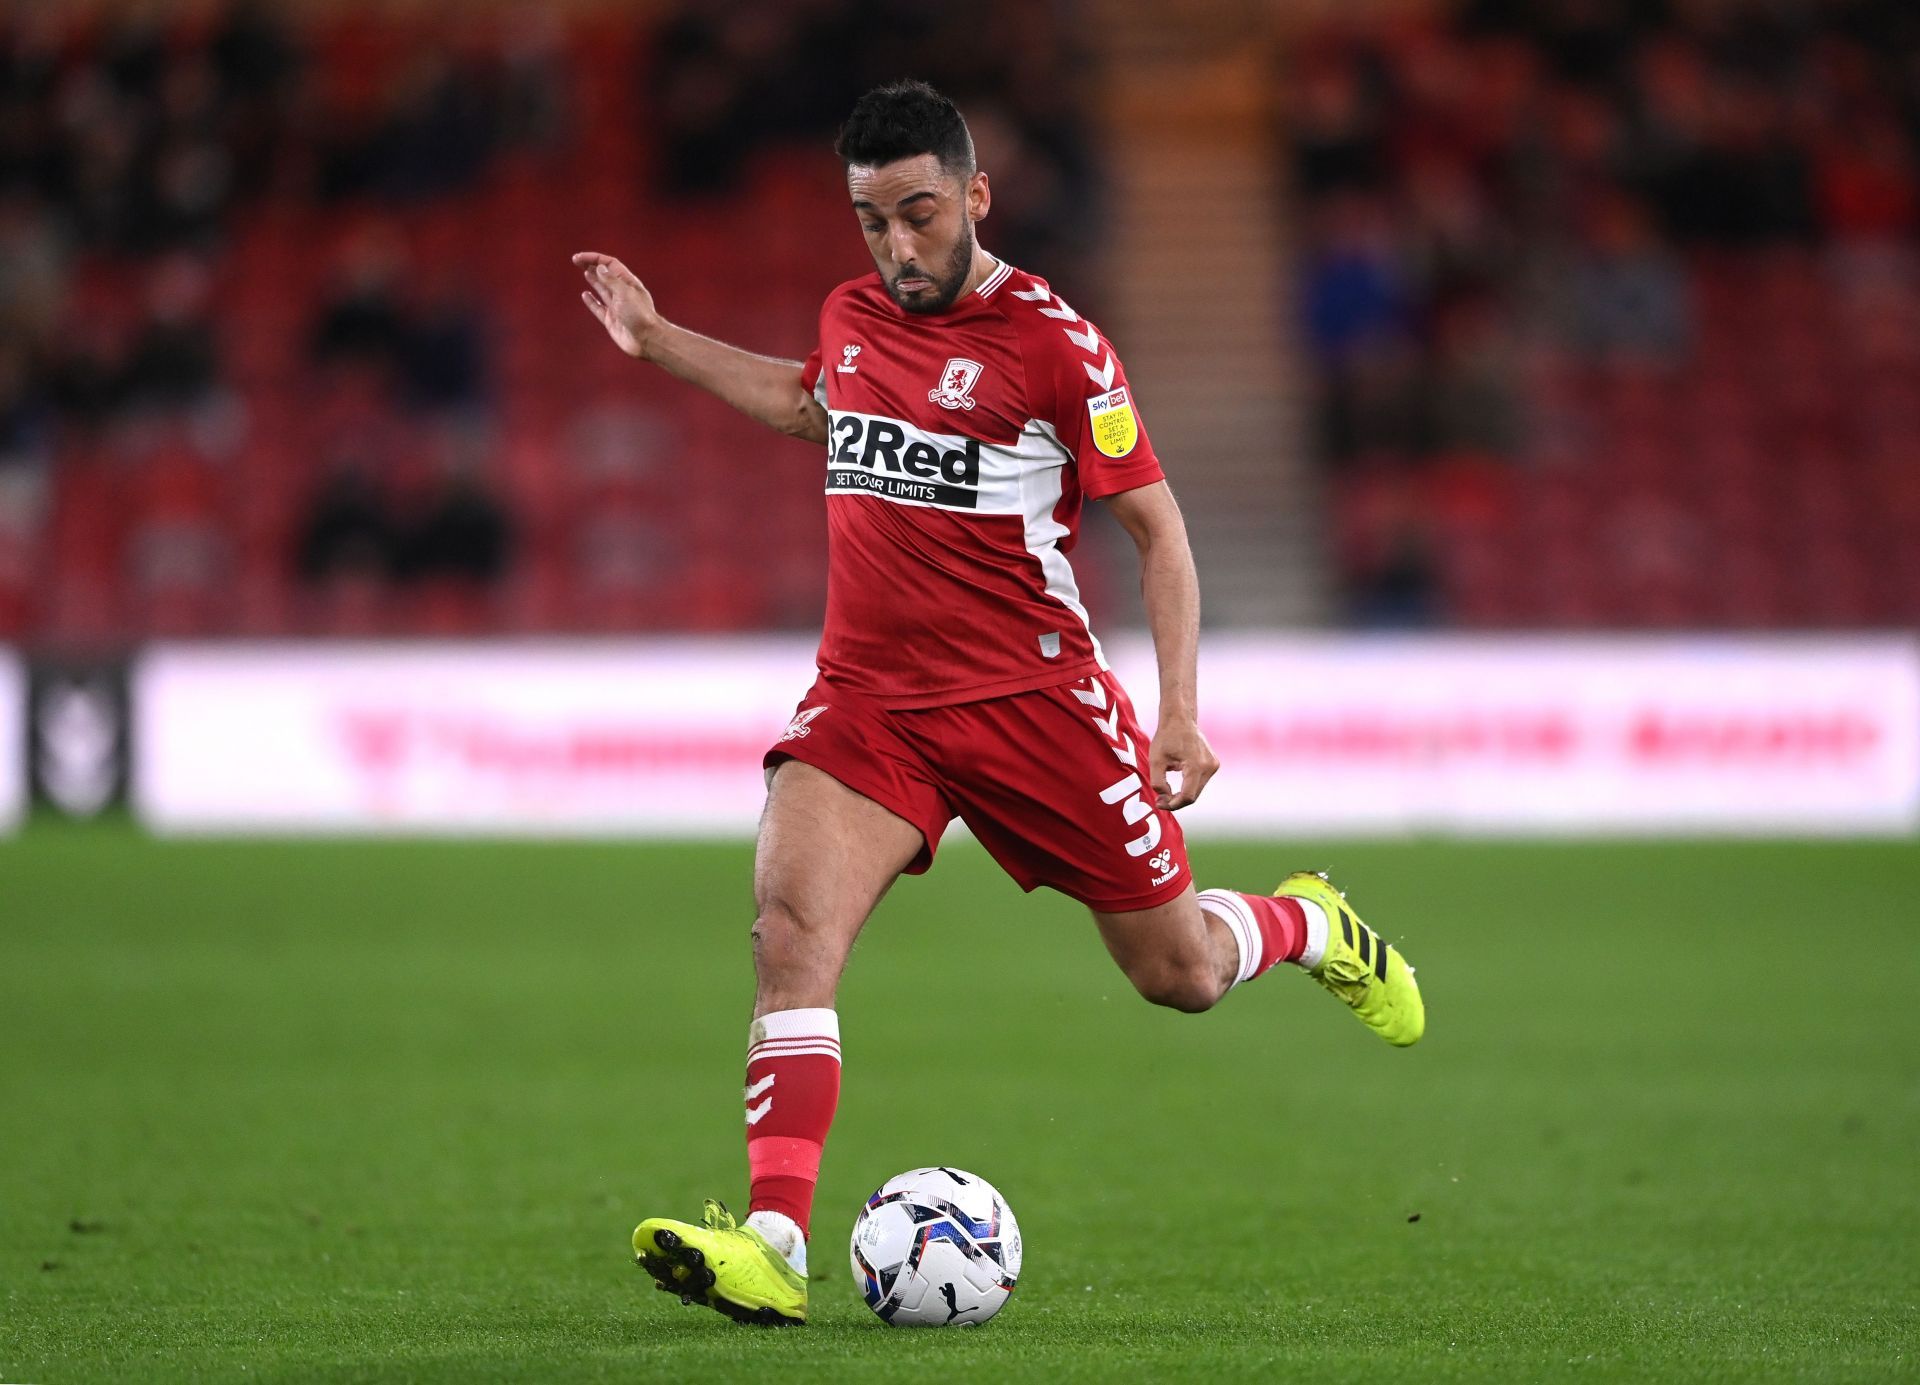 Middlesbrough will host Huddersfield Town on Monday - Sky Bet Championship